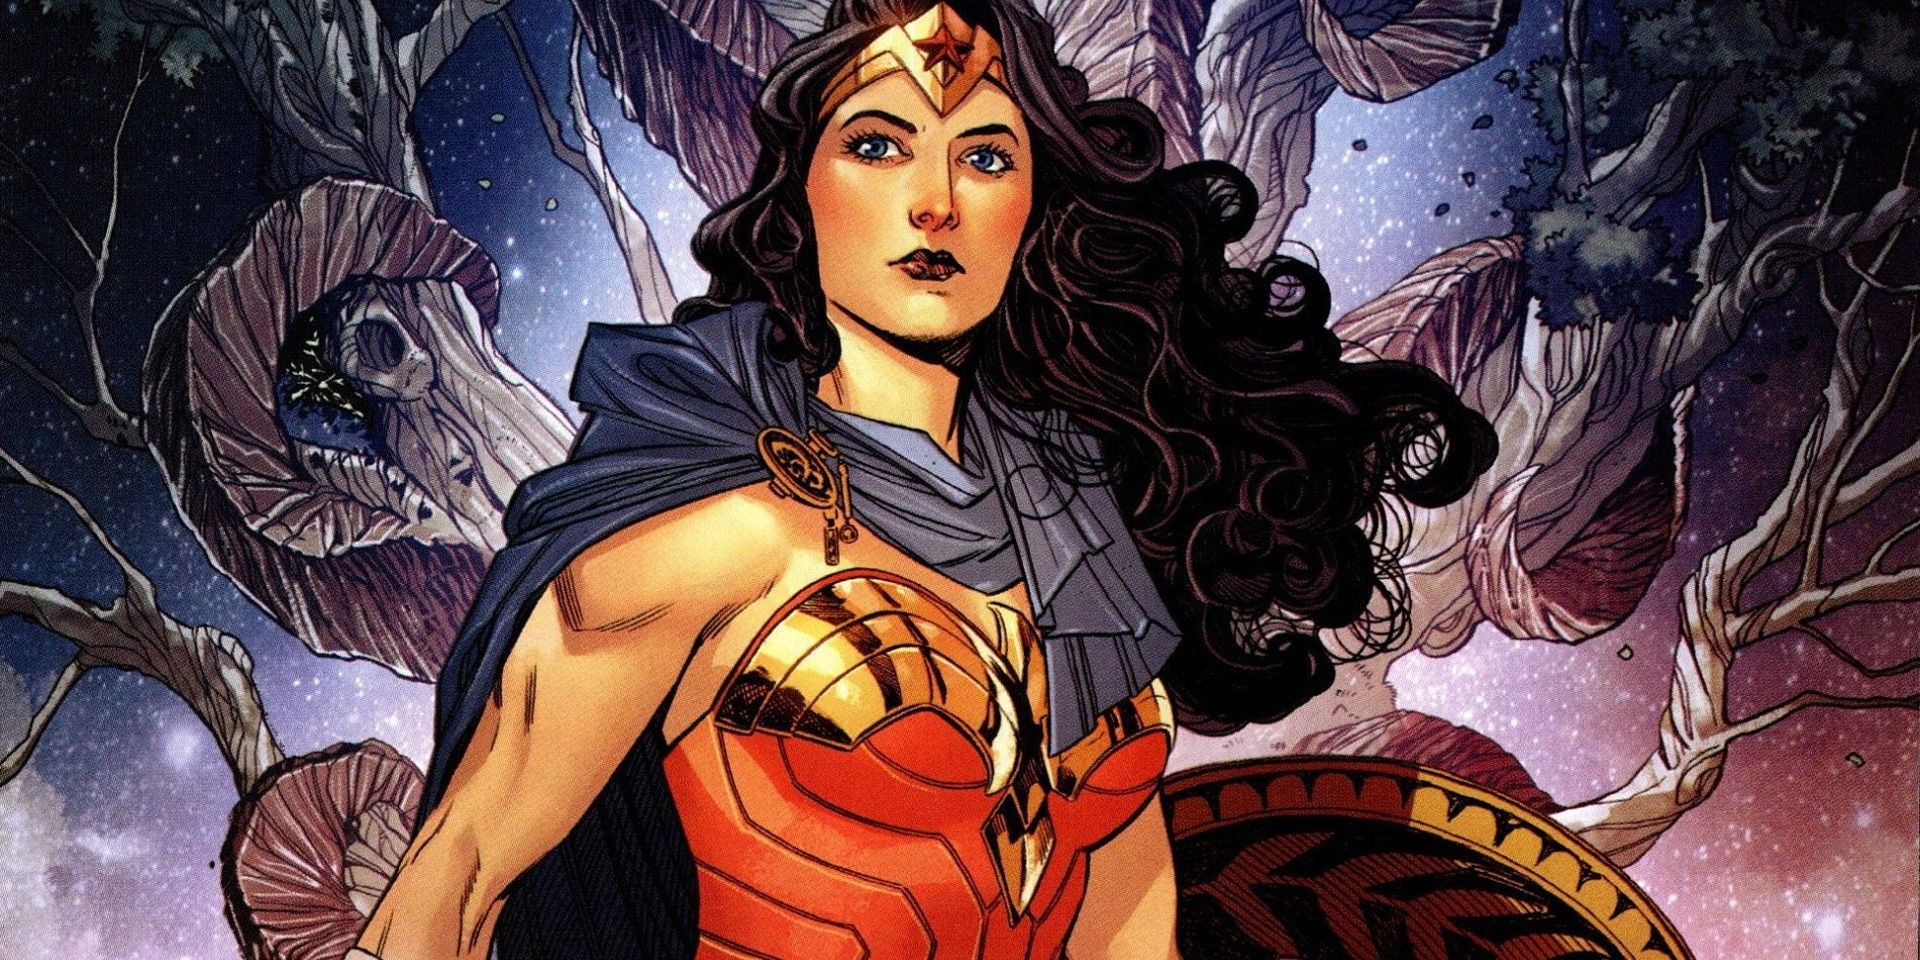 Wonder Woman stands with her shield in DC Comics